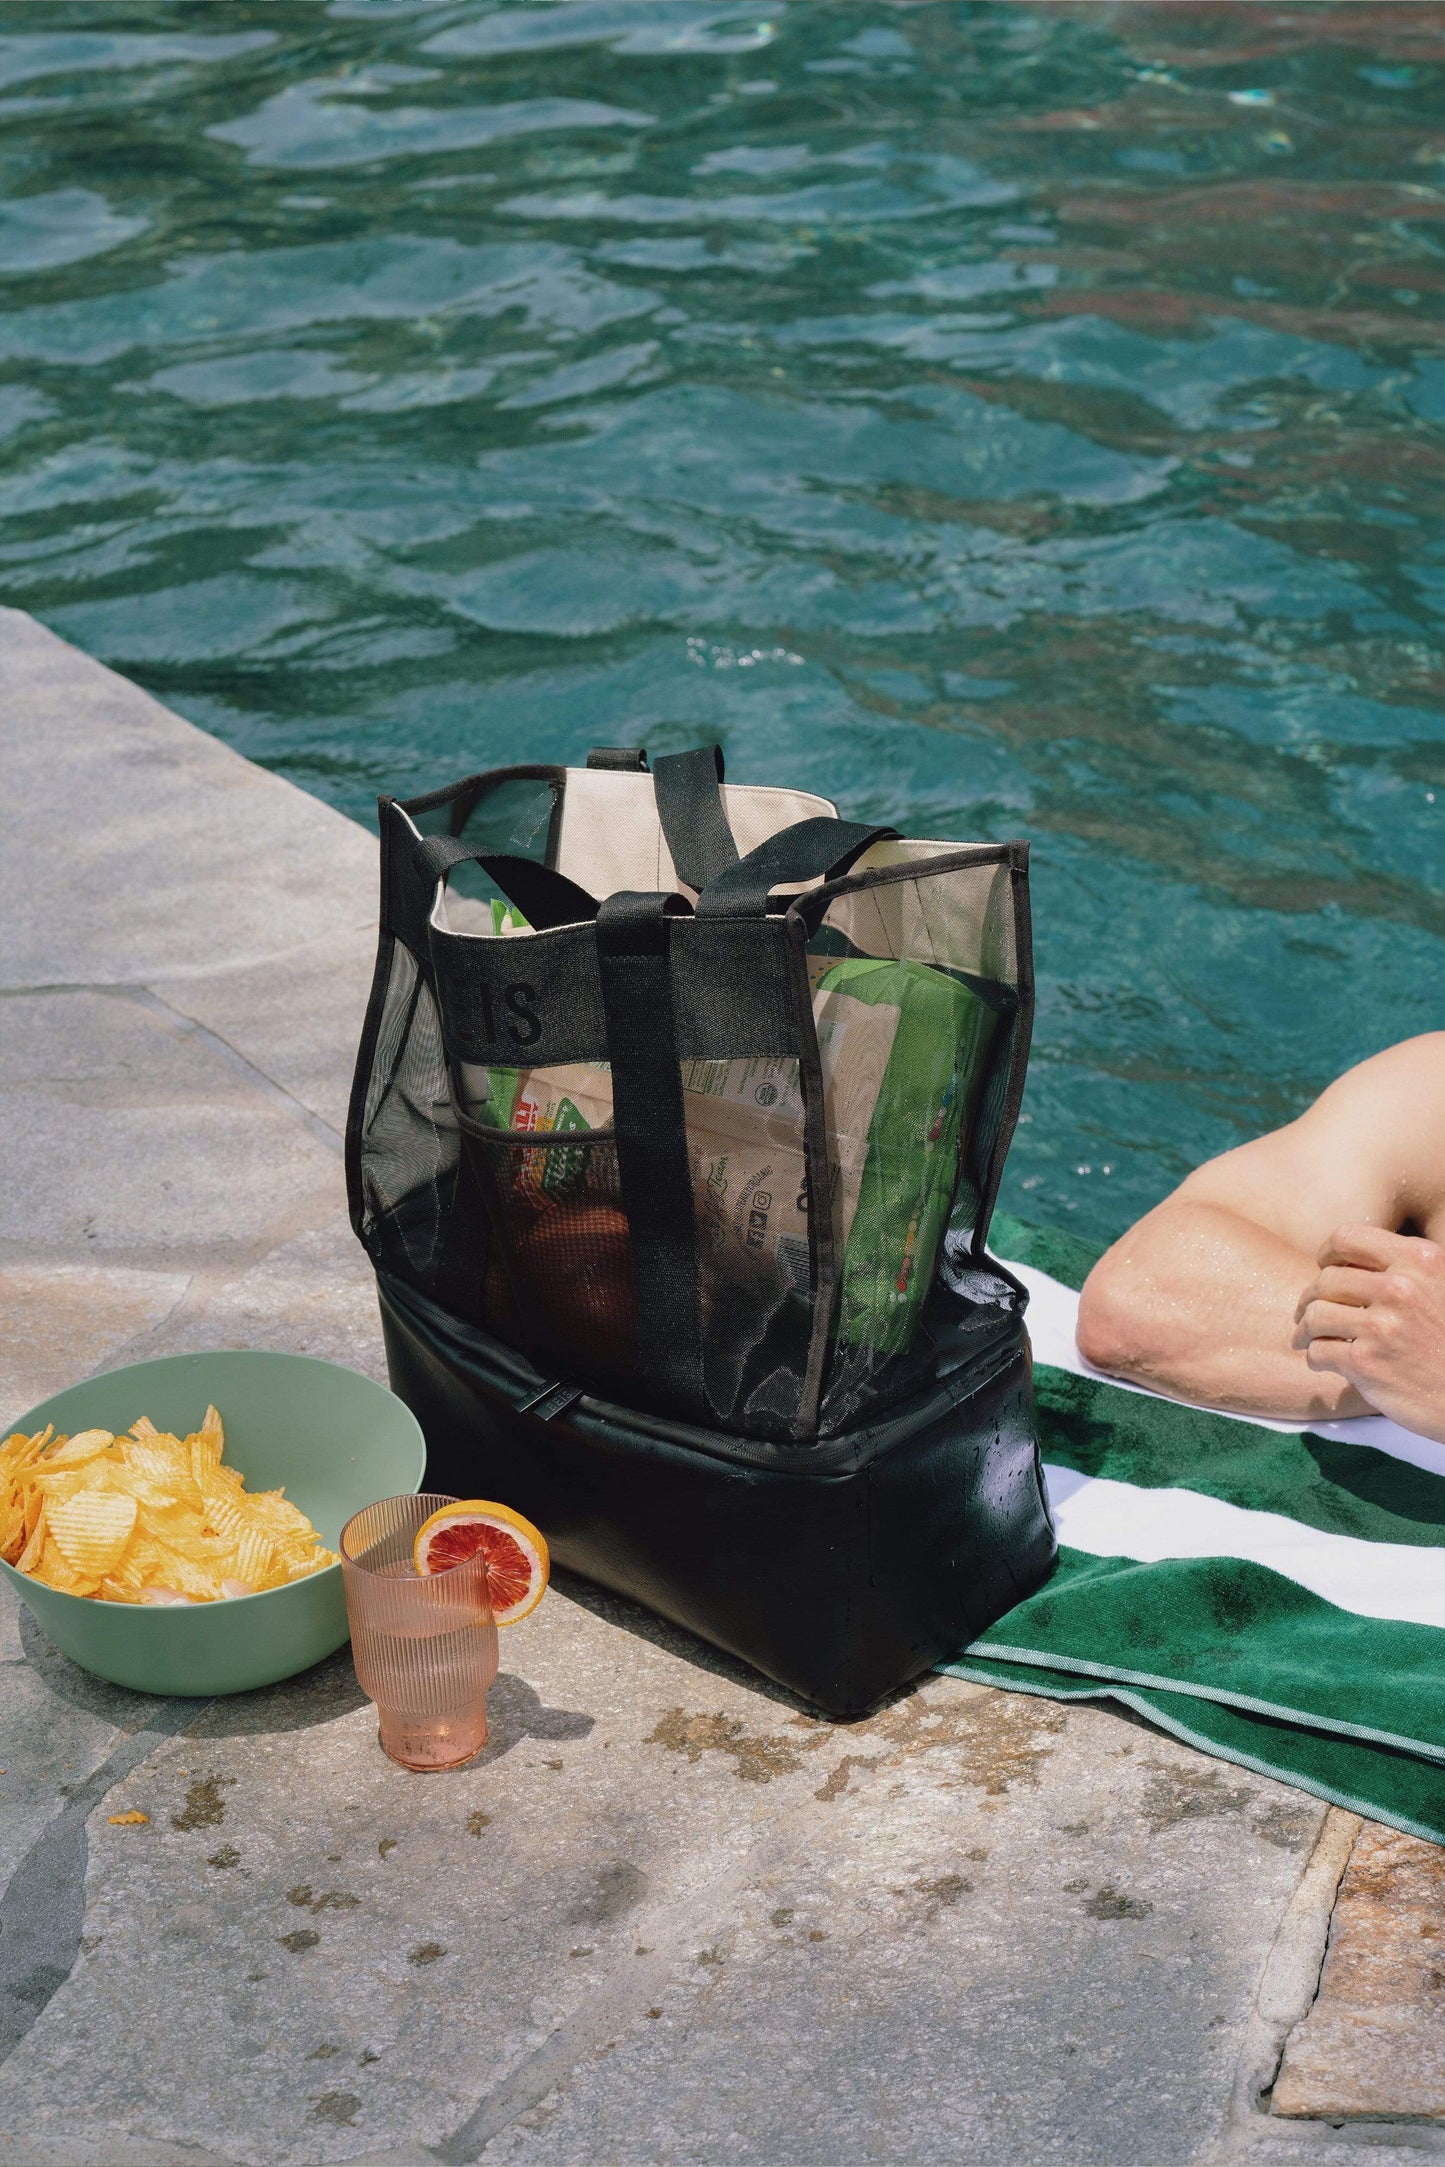 The Cooler Tote in Black